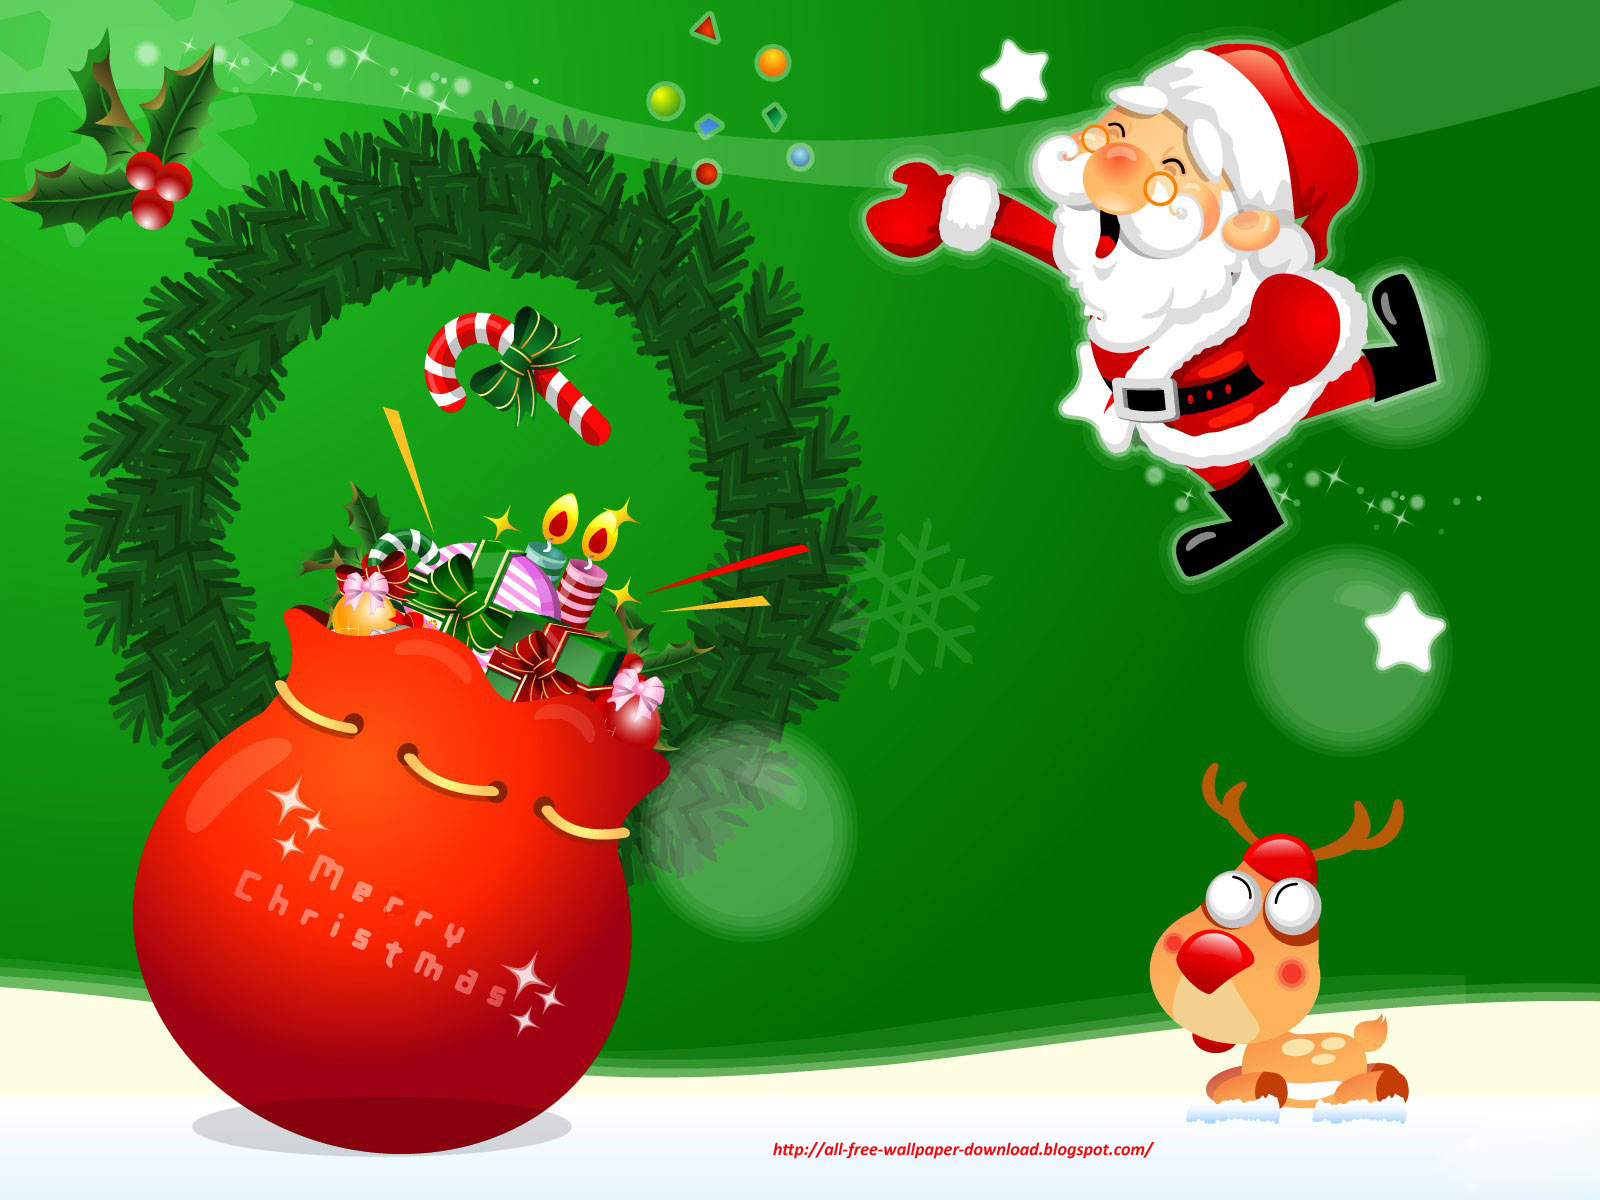 Peartreedesigns Christmas Wallpaper